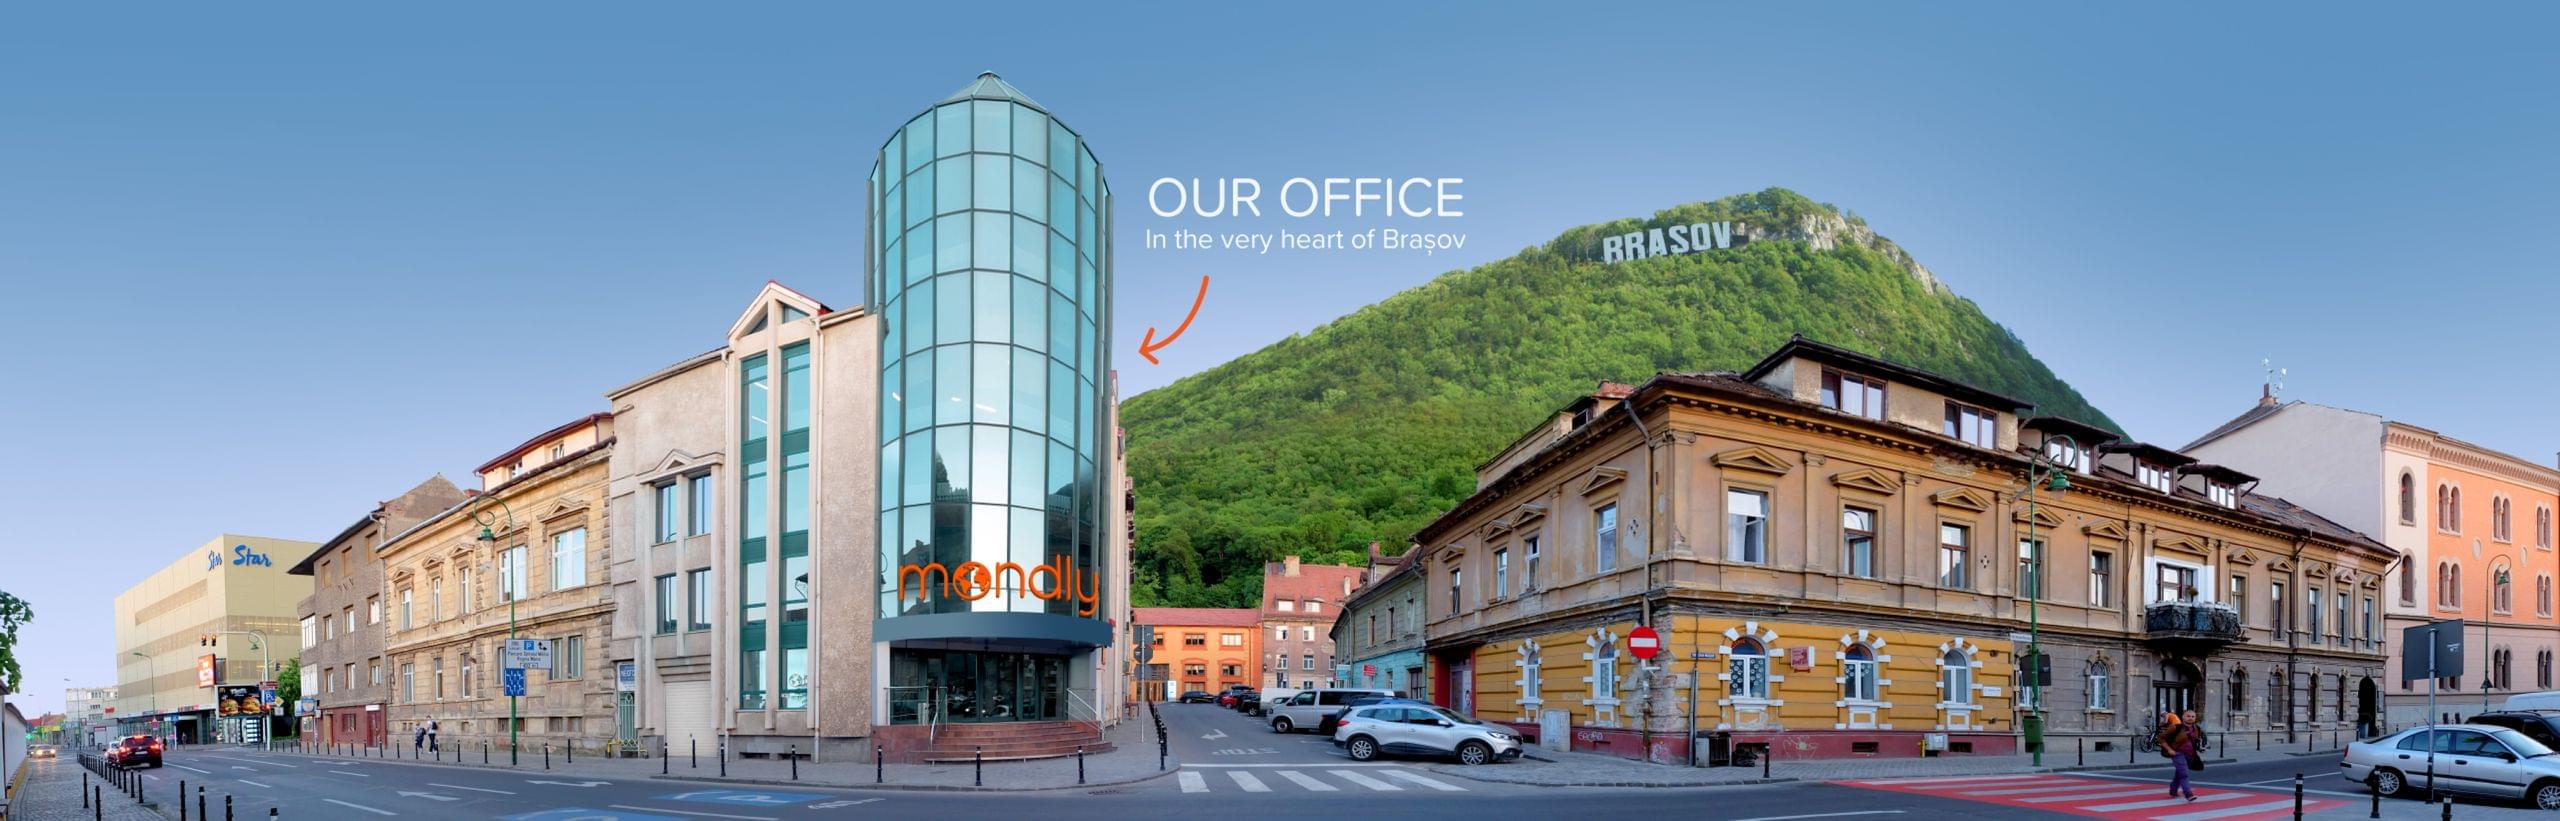 Our office in the very heart of Brasov